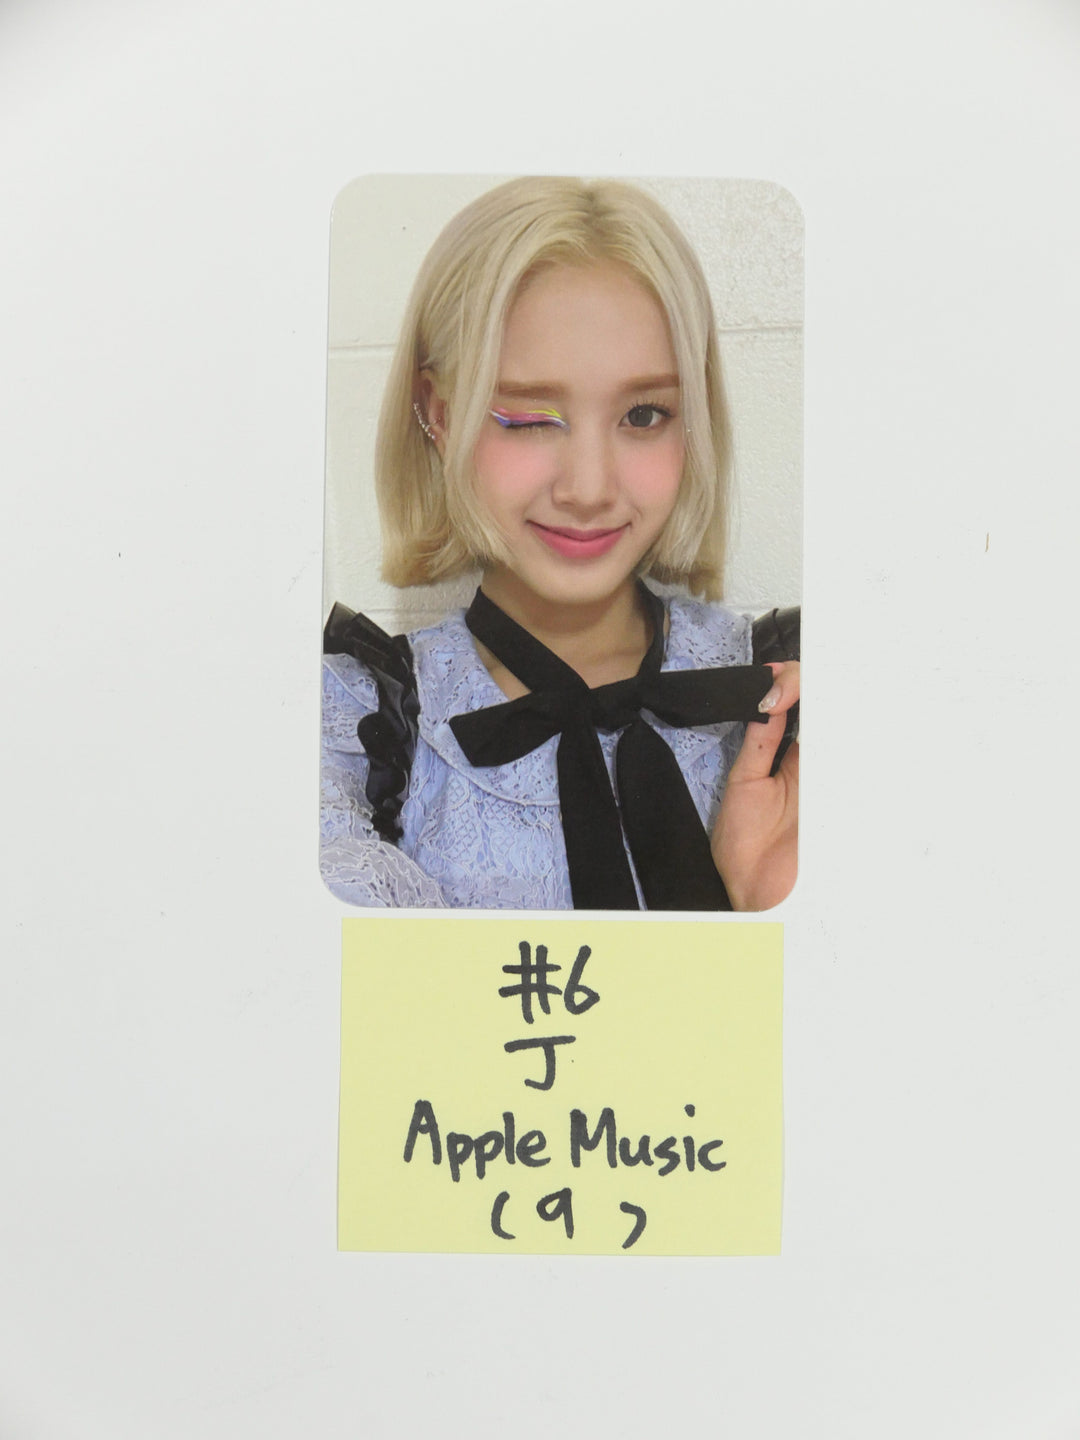 StayC 'STEREOTYPE' - Applemusic Fansign Event Photocard